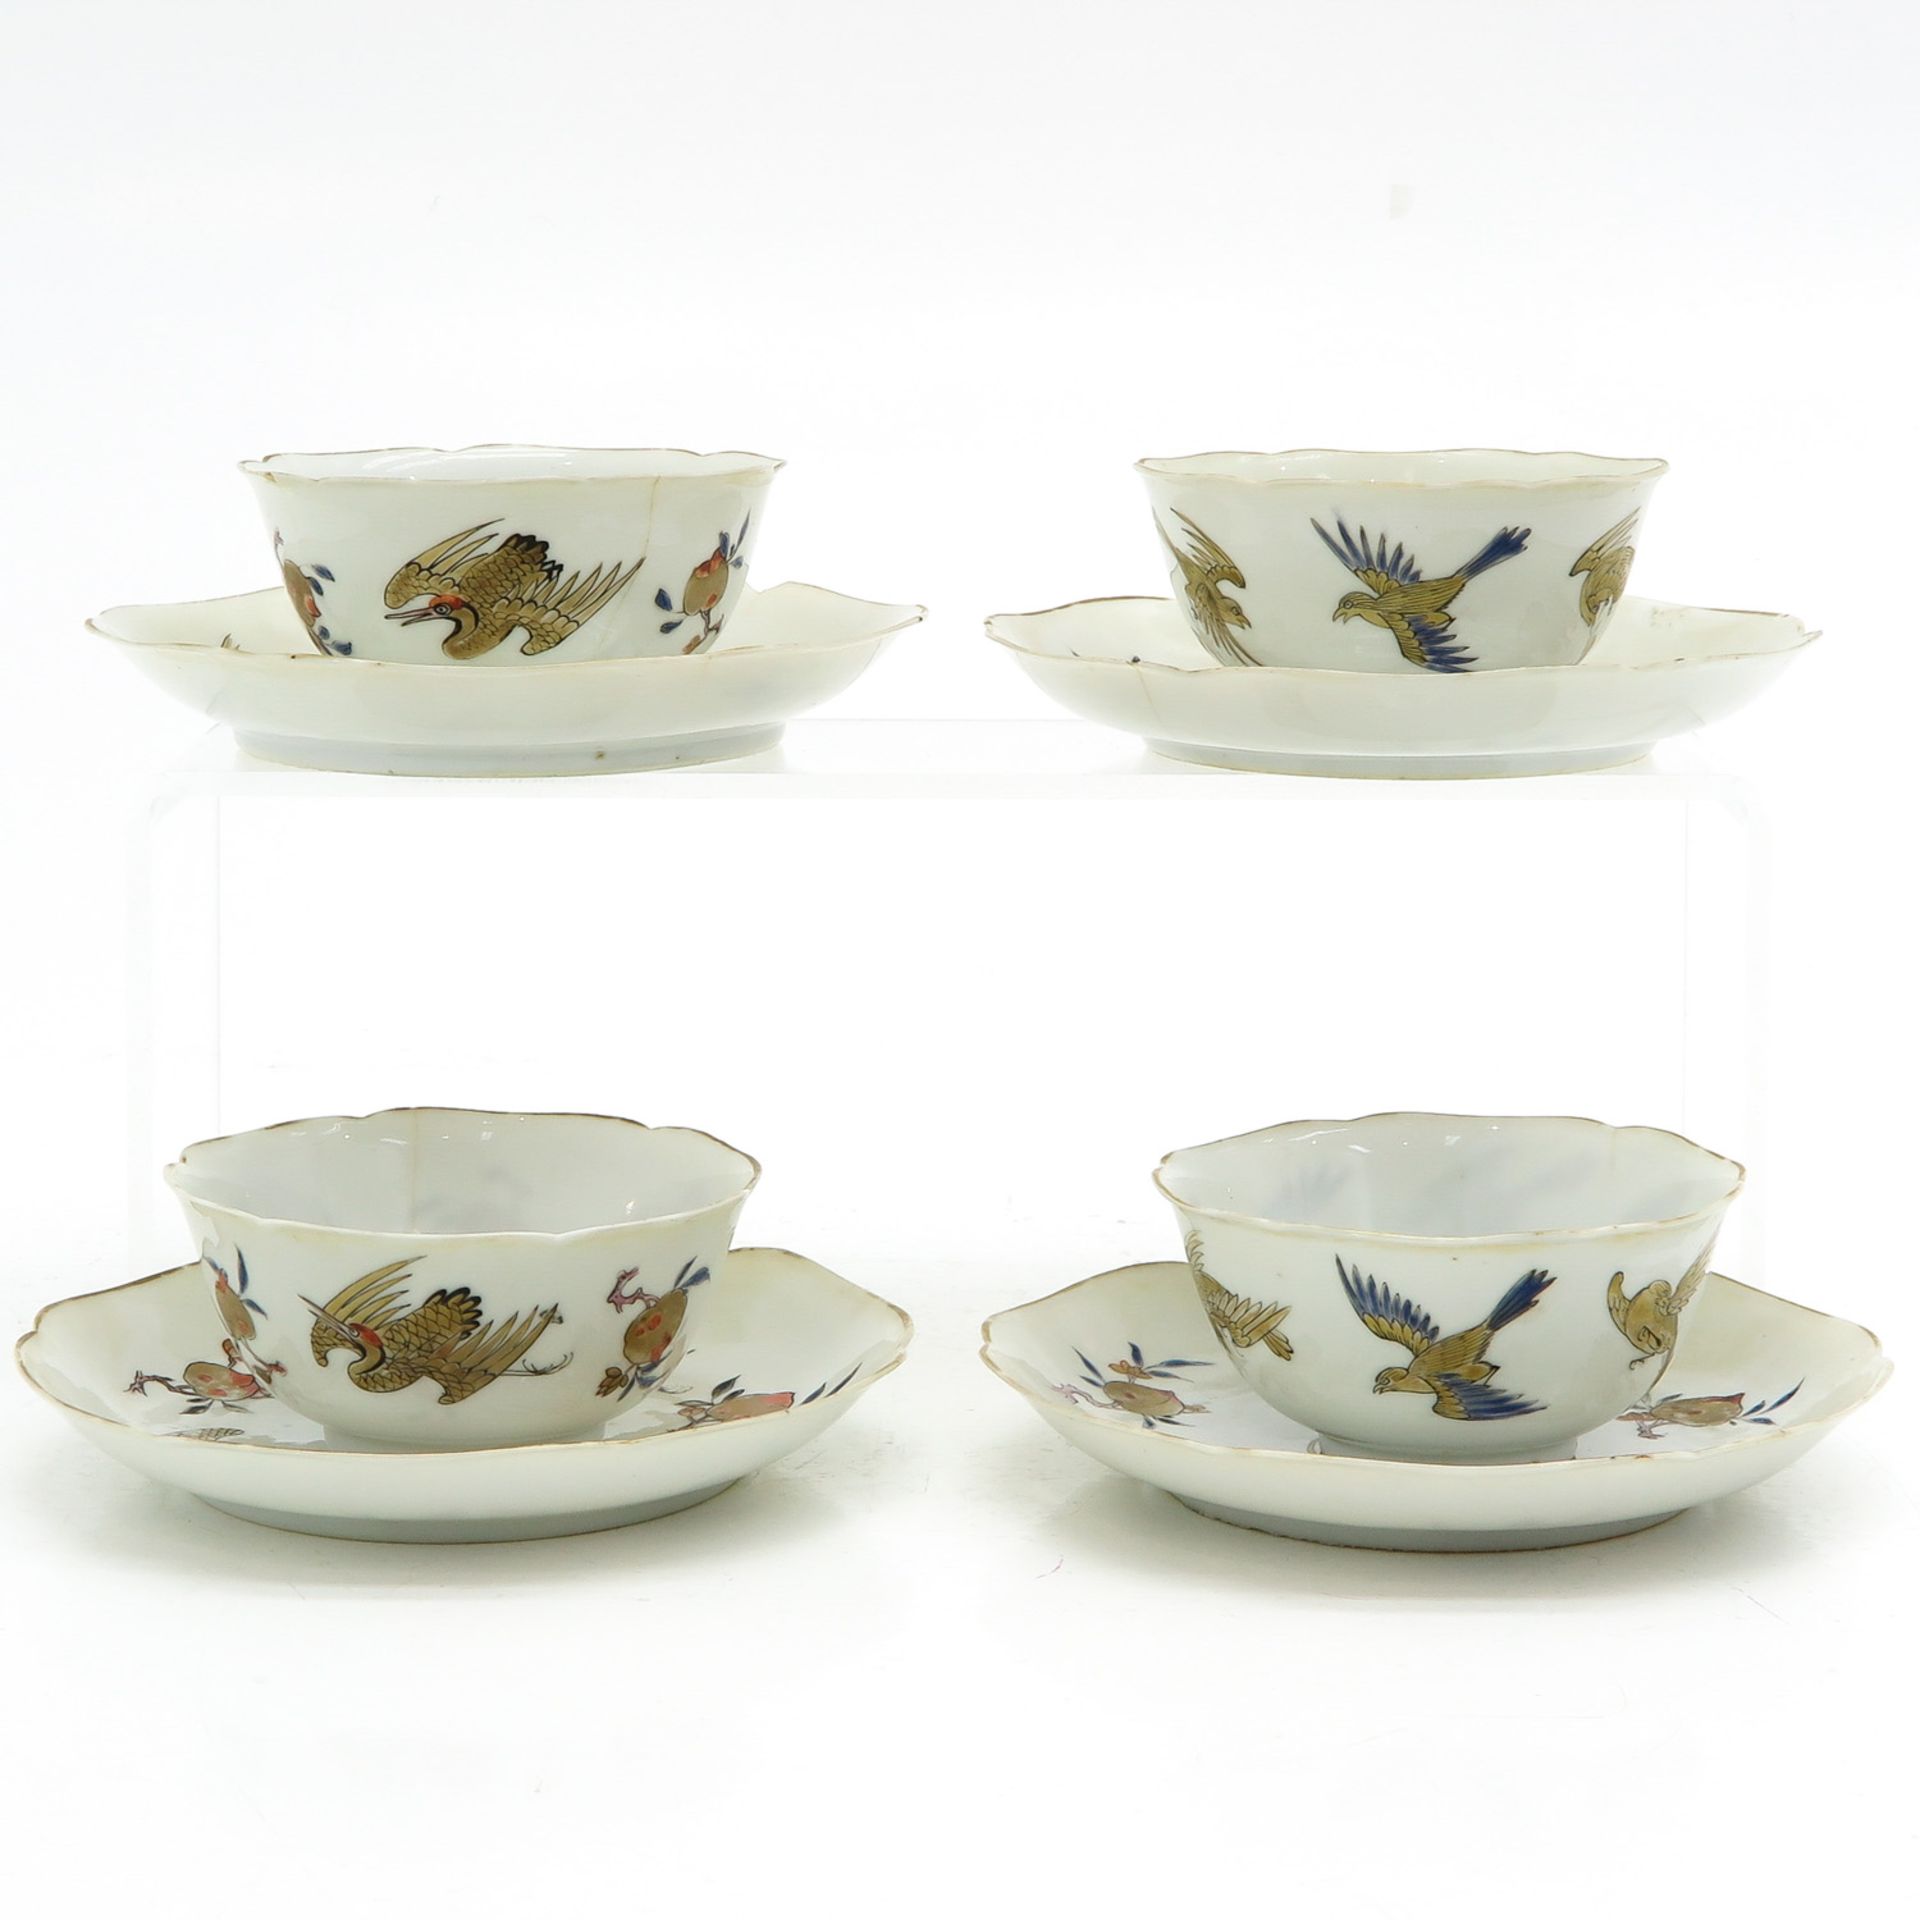 A Series of 4 Cups and Saucers